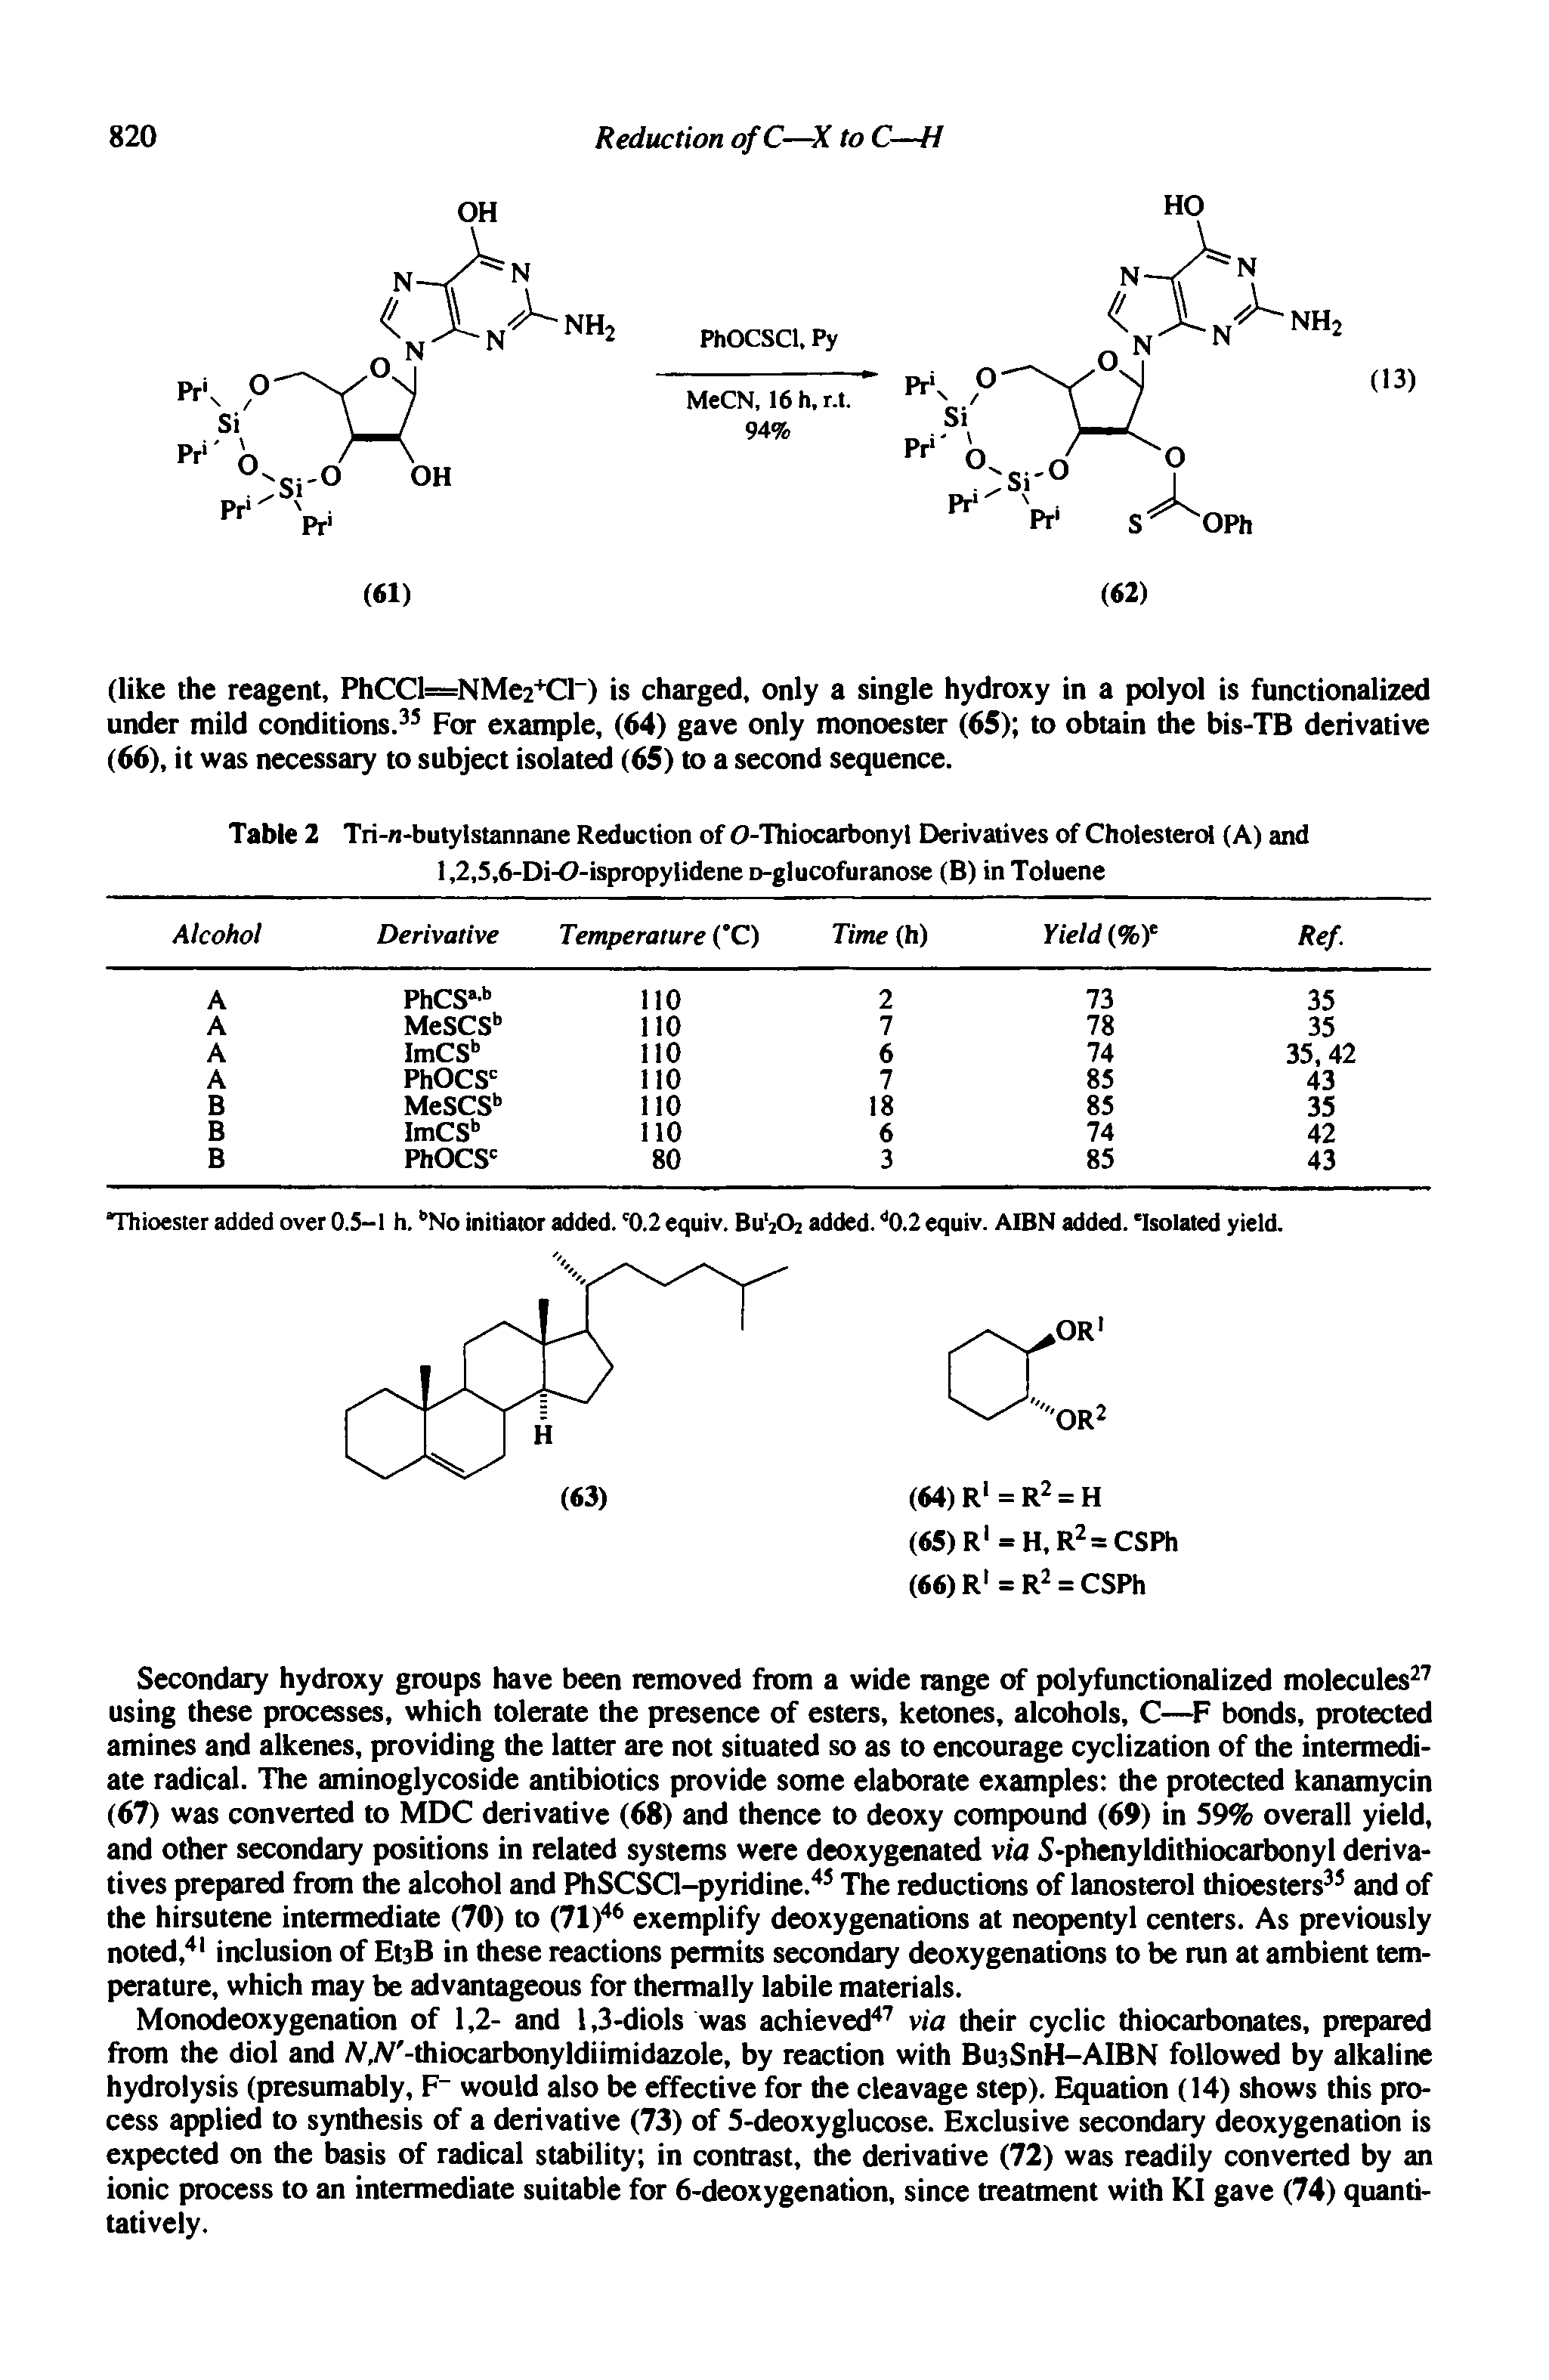 Table 2 Tri-n-butylstannane Reduction of 0-Thiocarbonyl Derivatives of Cholesterol (A) and 1,2,5,6-Di-O-ispropylidene o-glucofuranose (B) in Toluene...